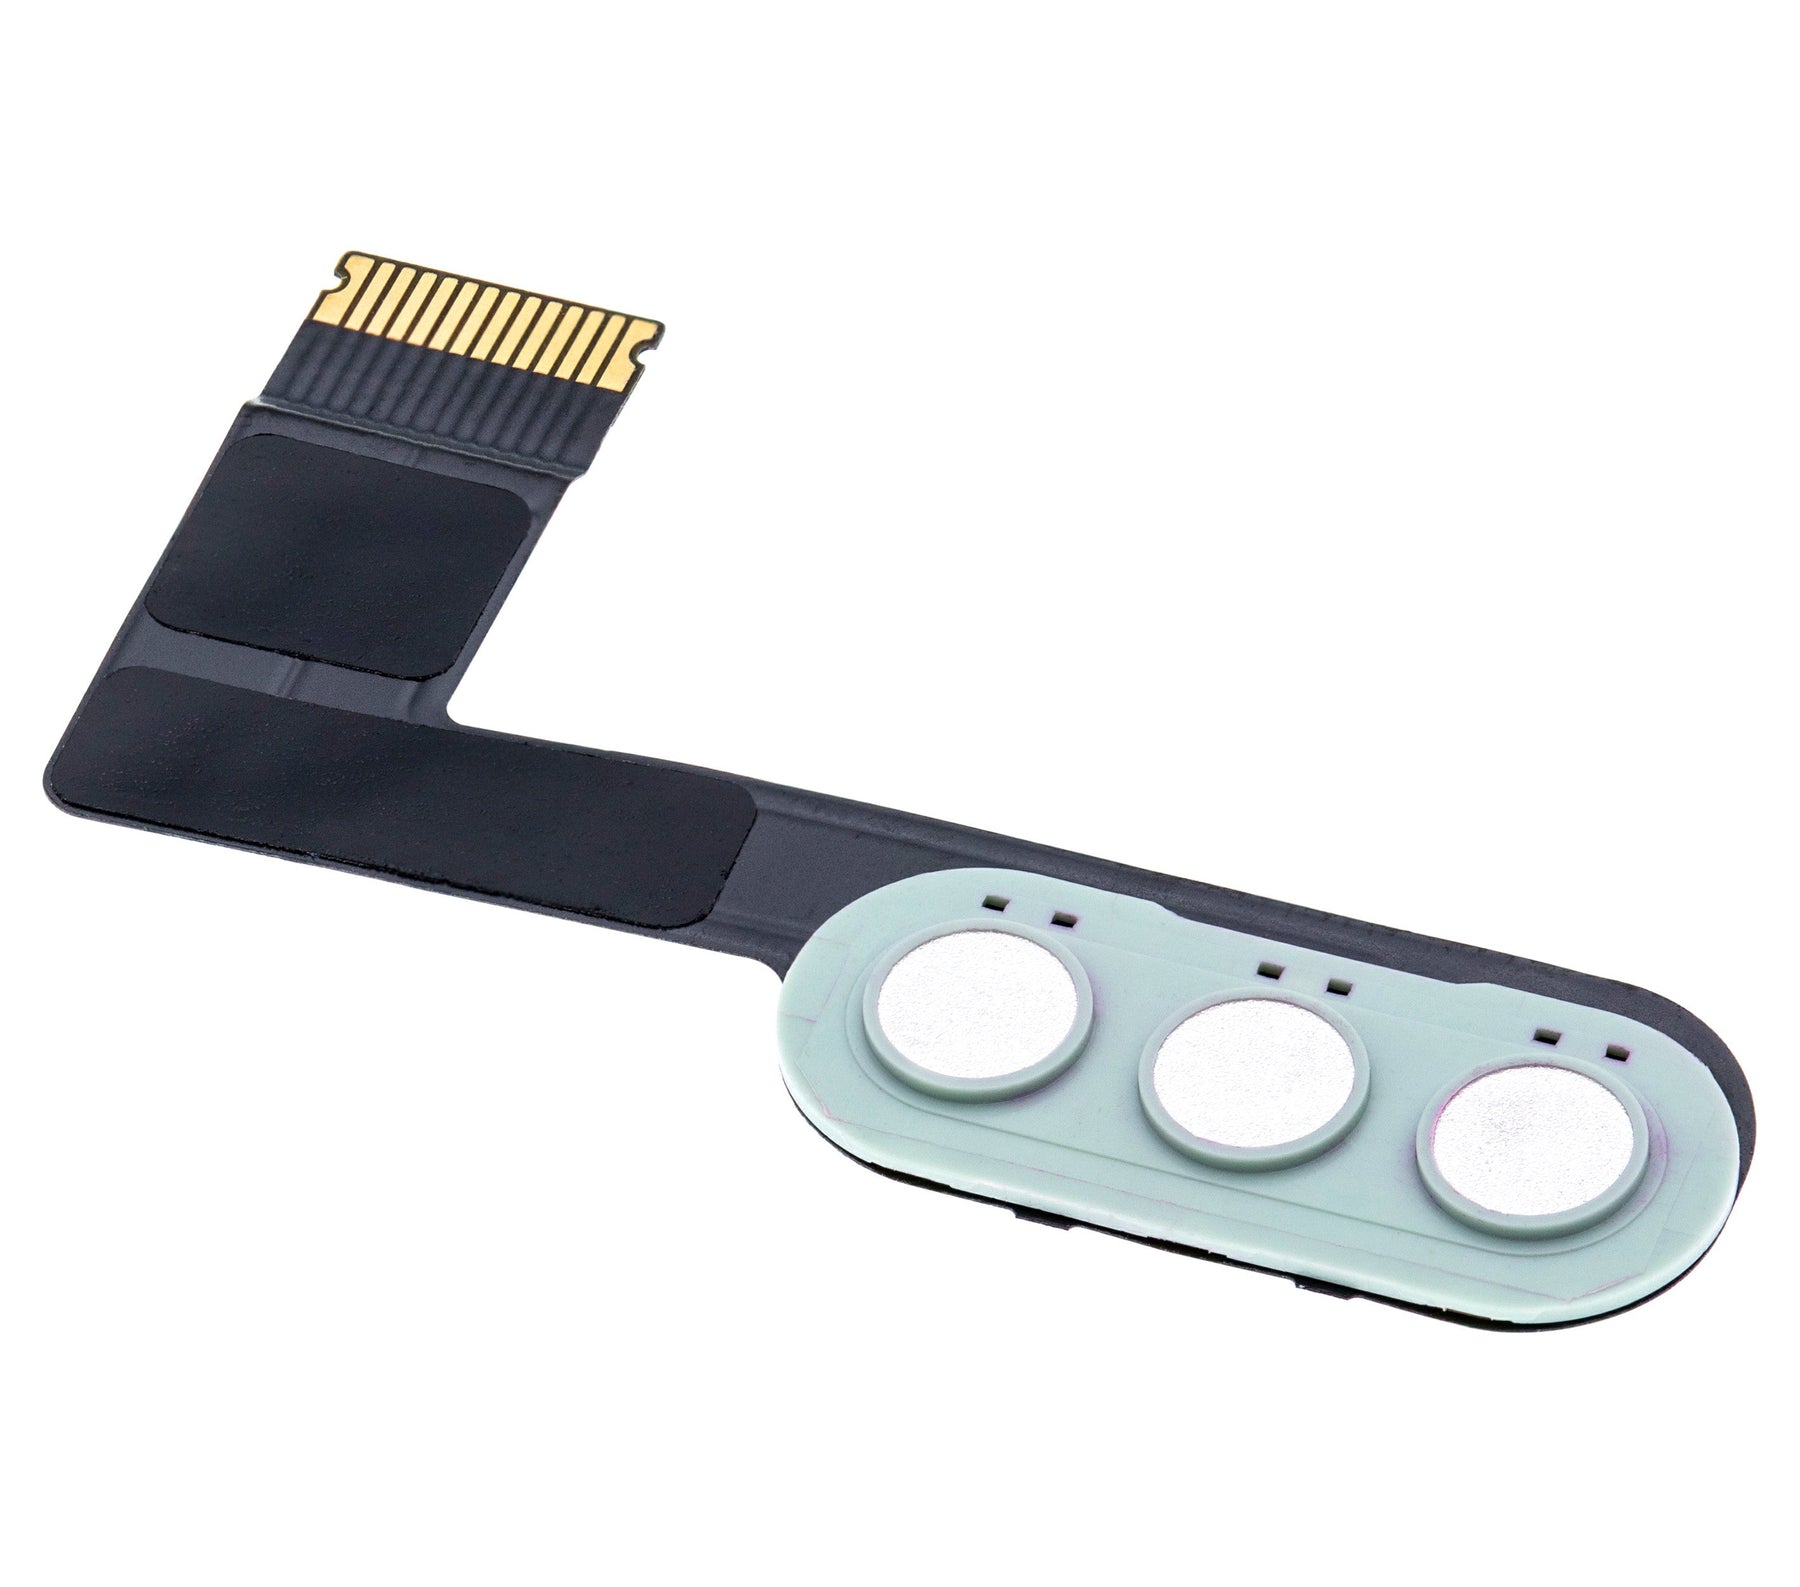 KEYBOARD FLEX CABLE COMPATIBLE FOR IPAD AIR 4/5 - GREEN